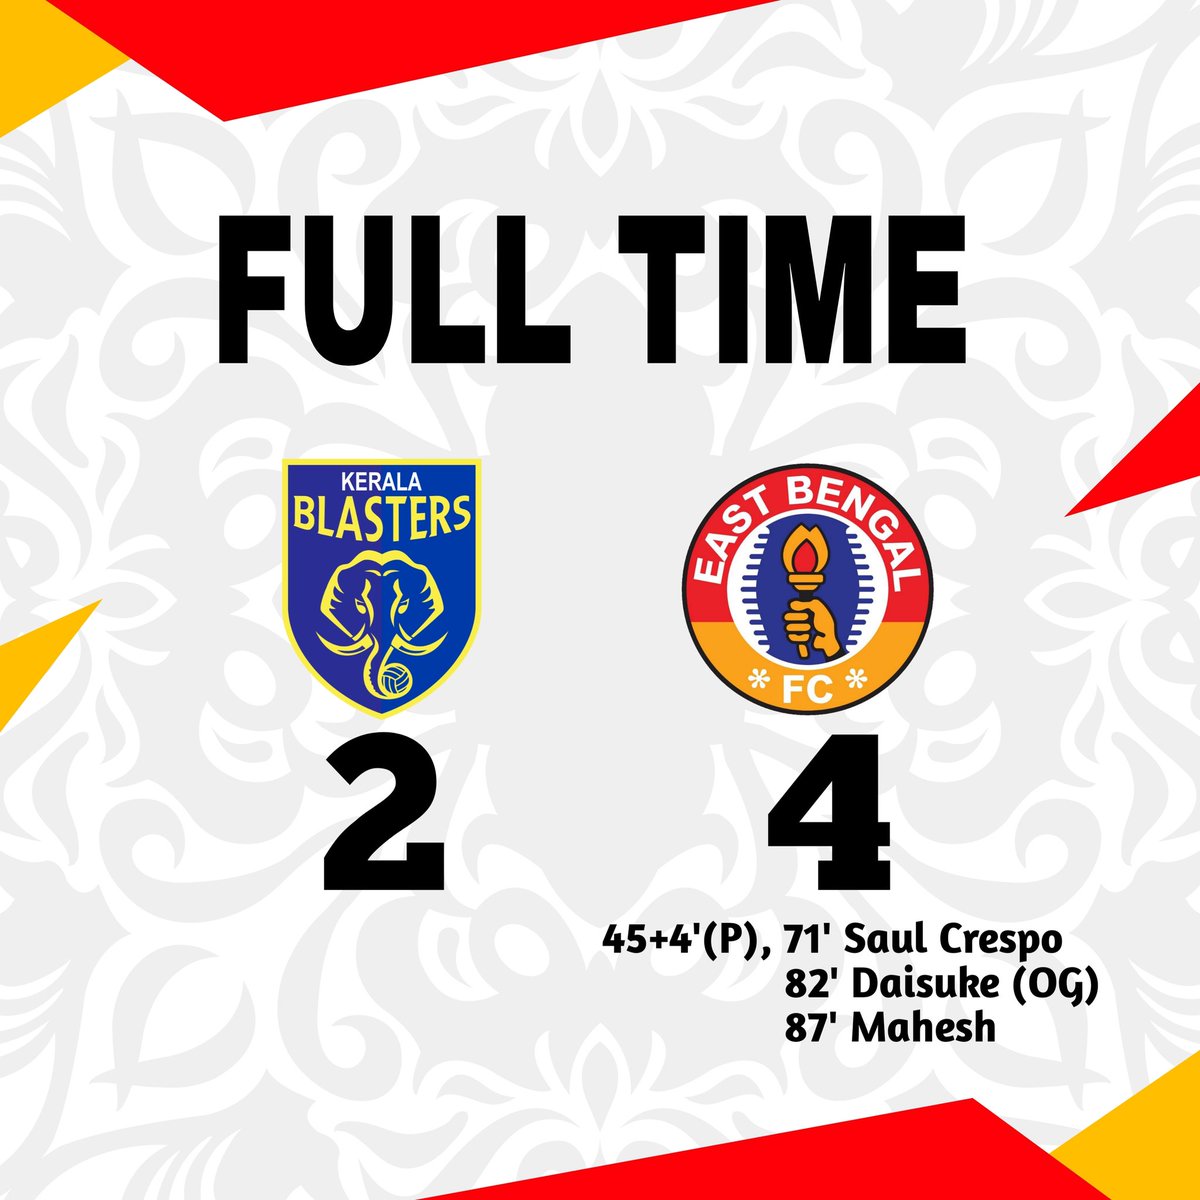 Leaving our mark in their territory! 💥An electrifying performance as we conquer Kerala Blasters FC with style! #KBFCEBFC #EastBengalFC #EBRP